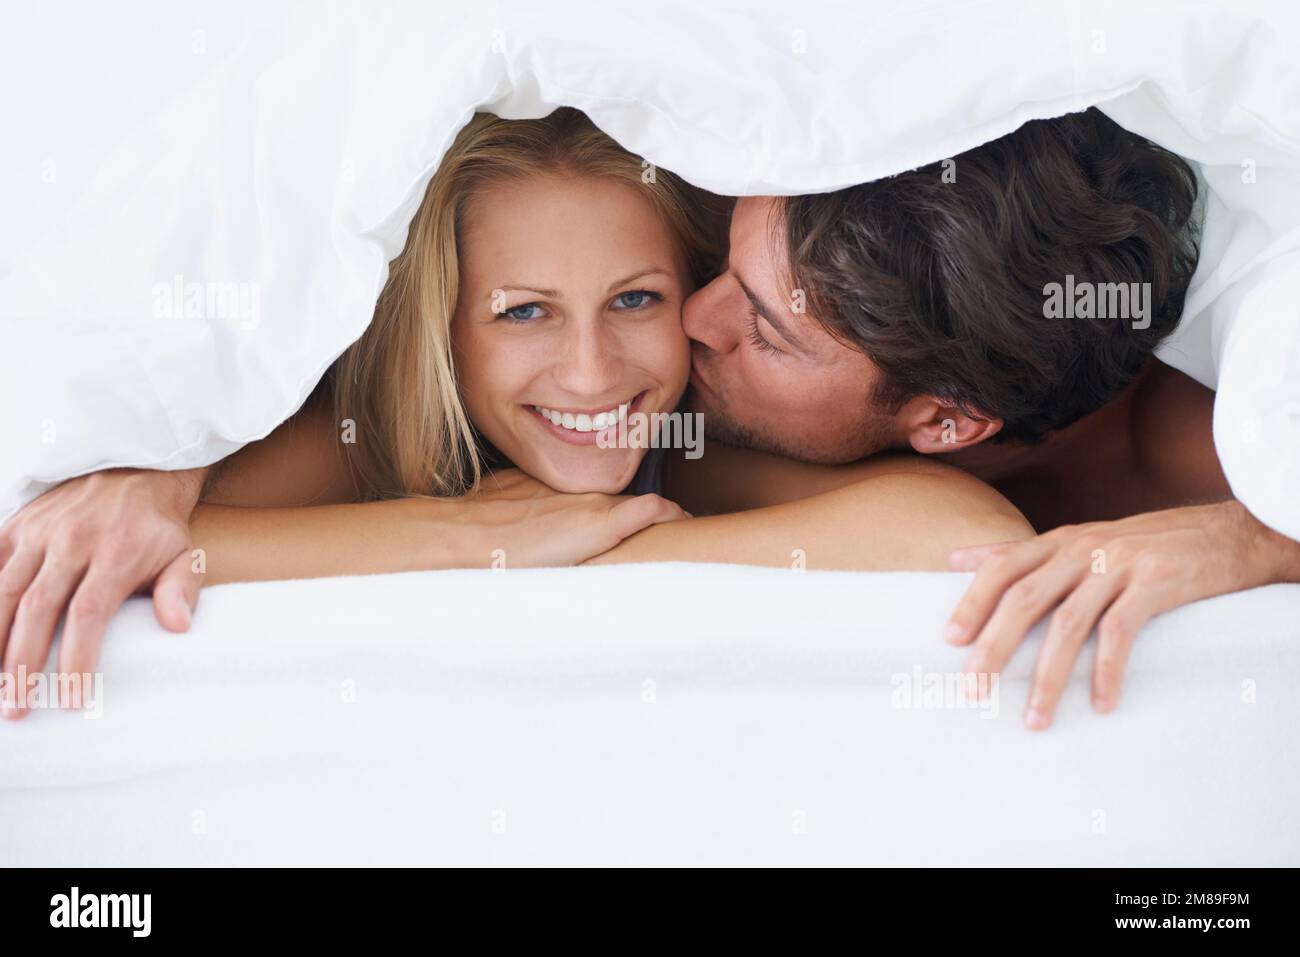 Happy with her husband. A man kissing a smiling woman on the cheek while lying on a bed and cuddling under a duvet cover. Stock Photo